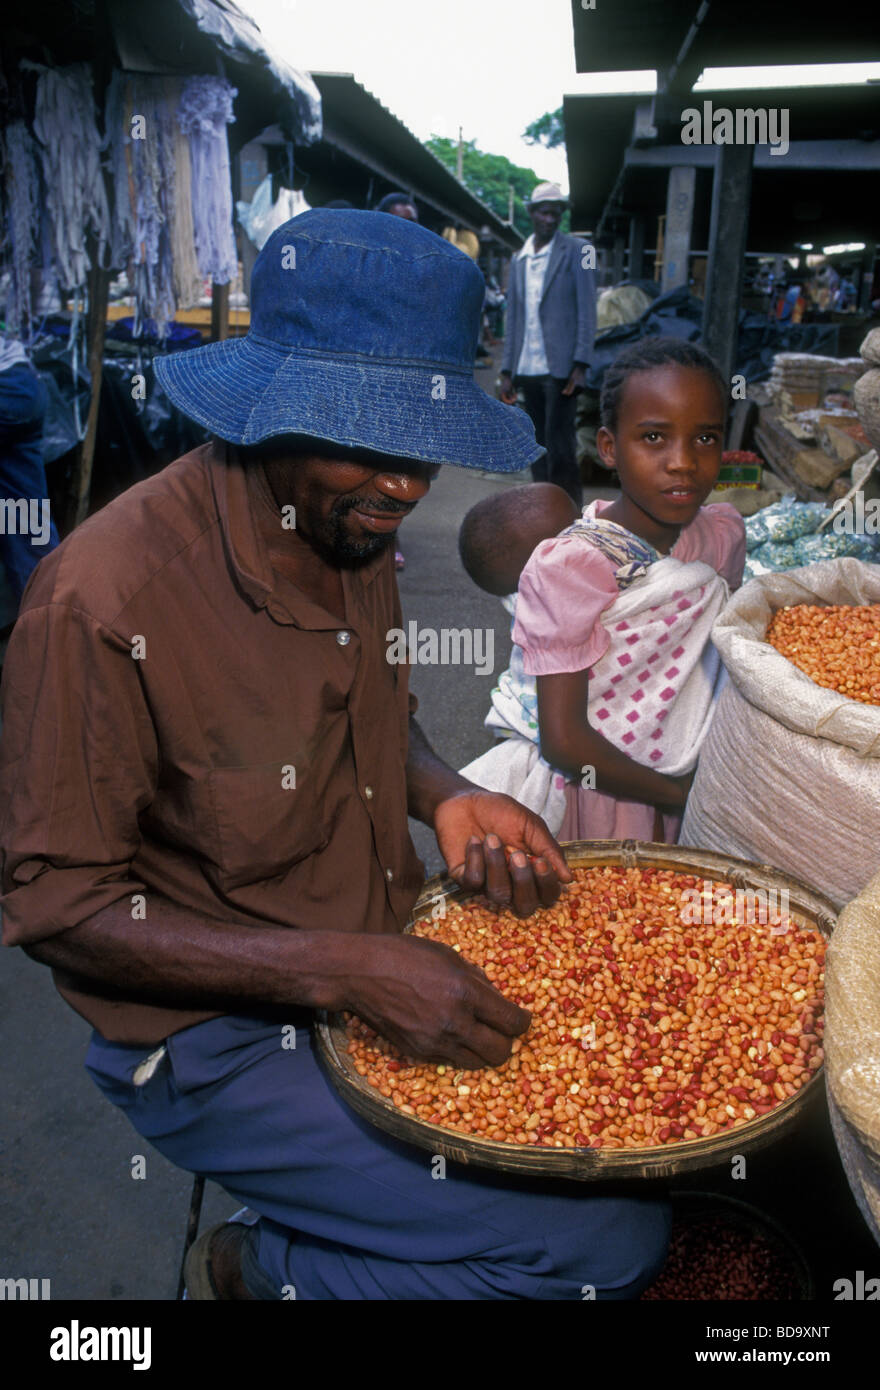 Zimbabwean man, vendor, seller, selling dried beans, legumes, central market, city of Harare, Harare Province, Zimbabwe Stock Photo